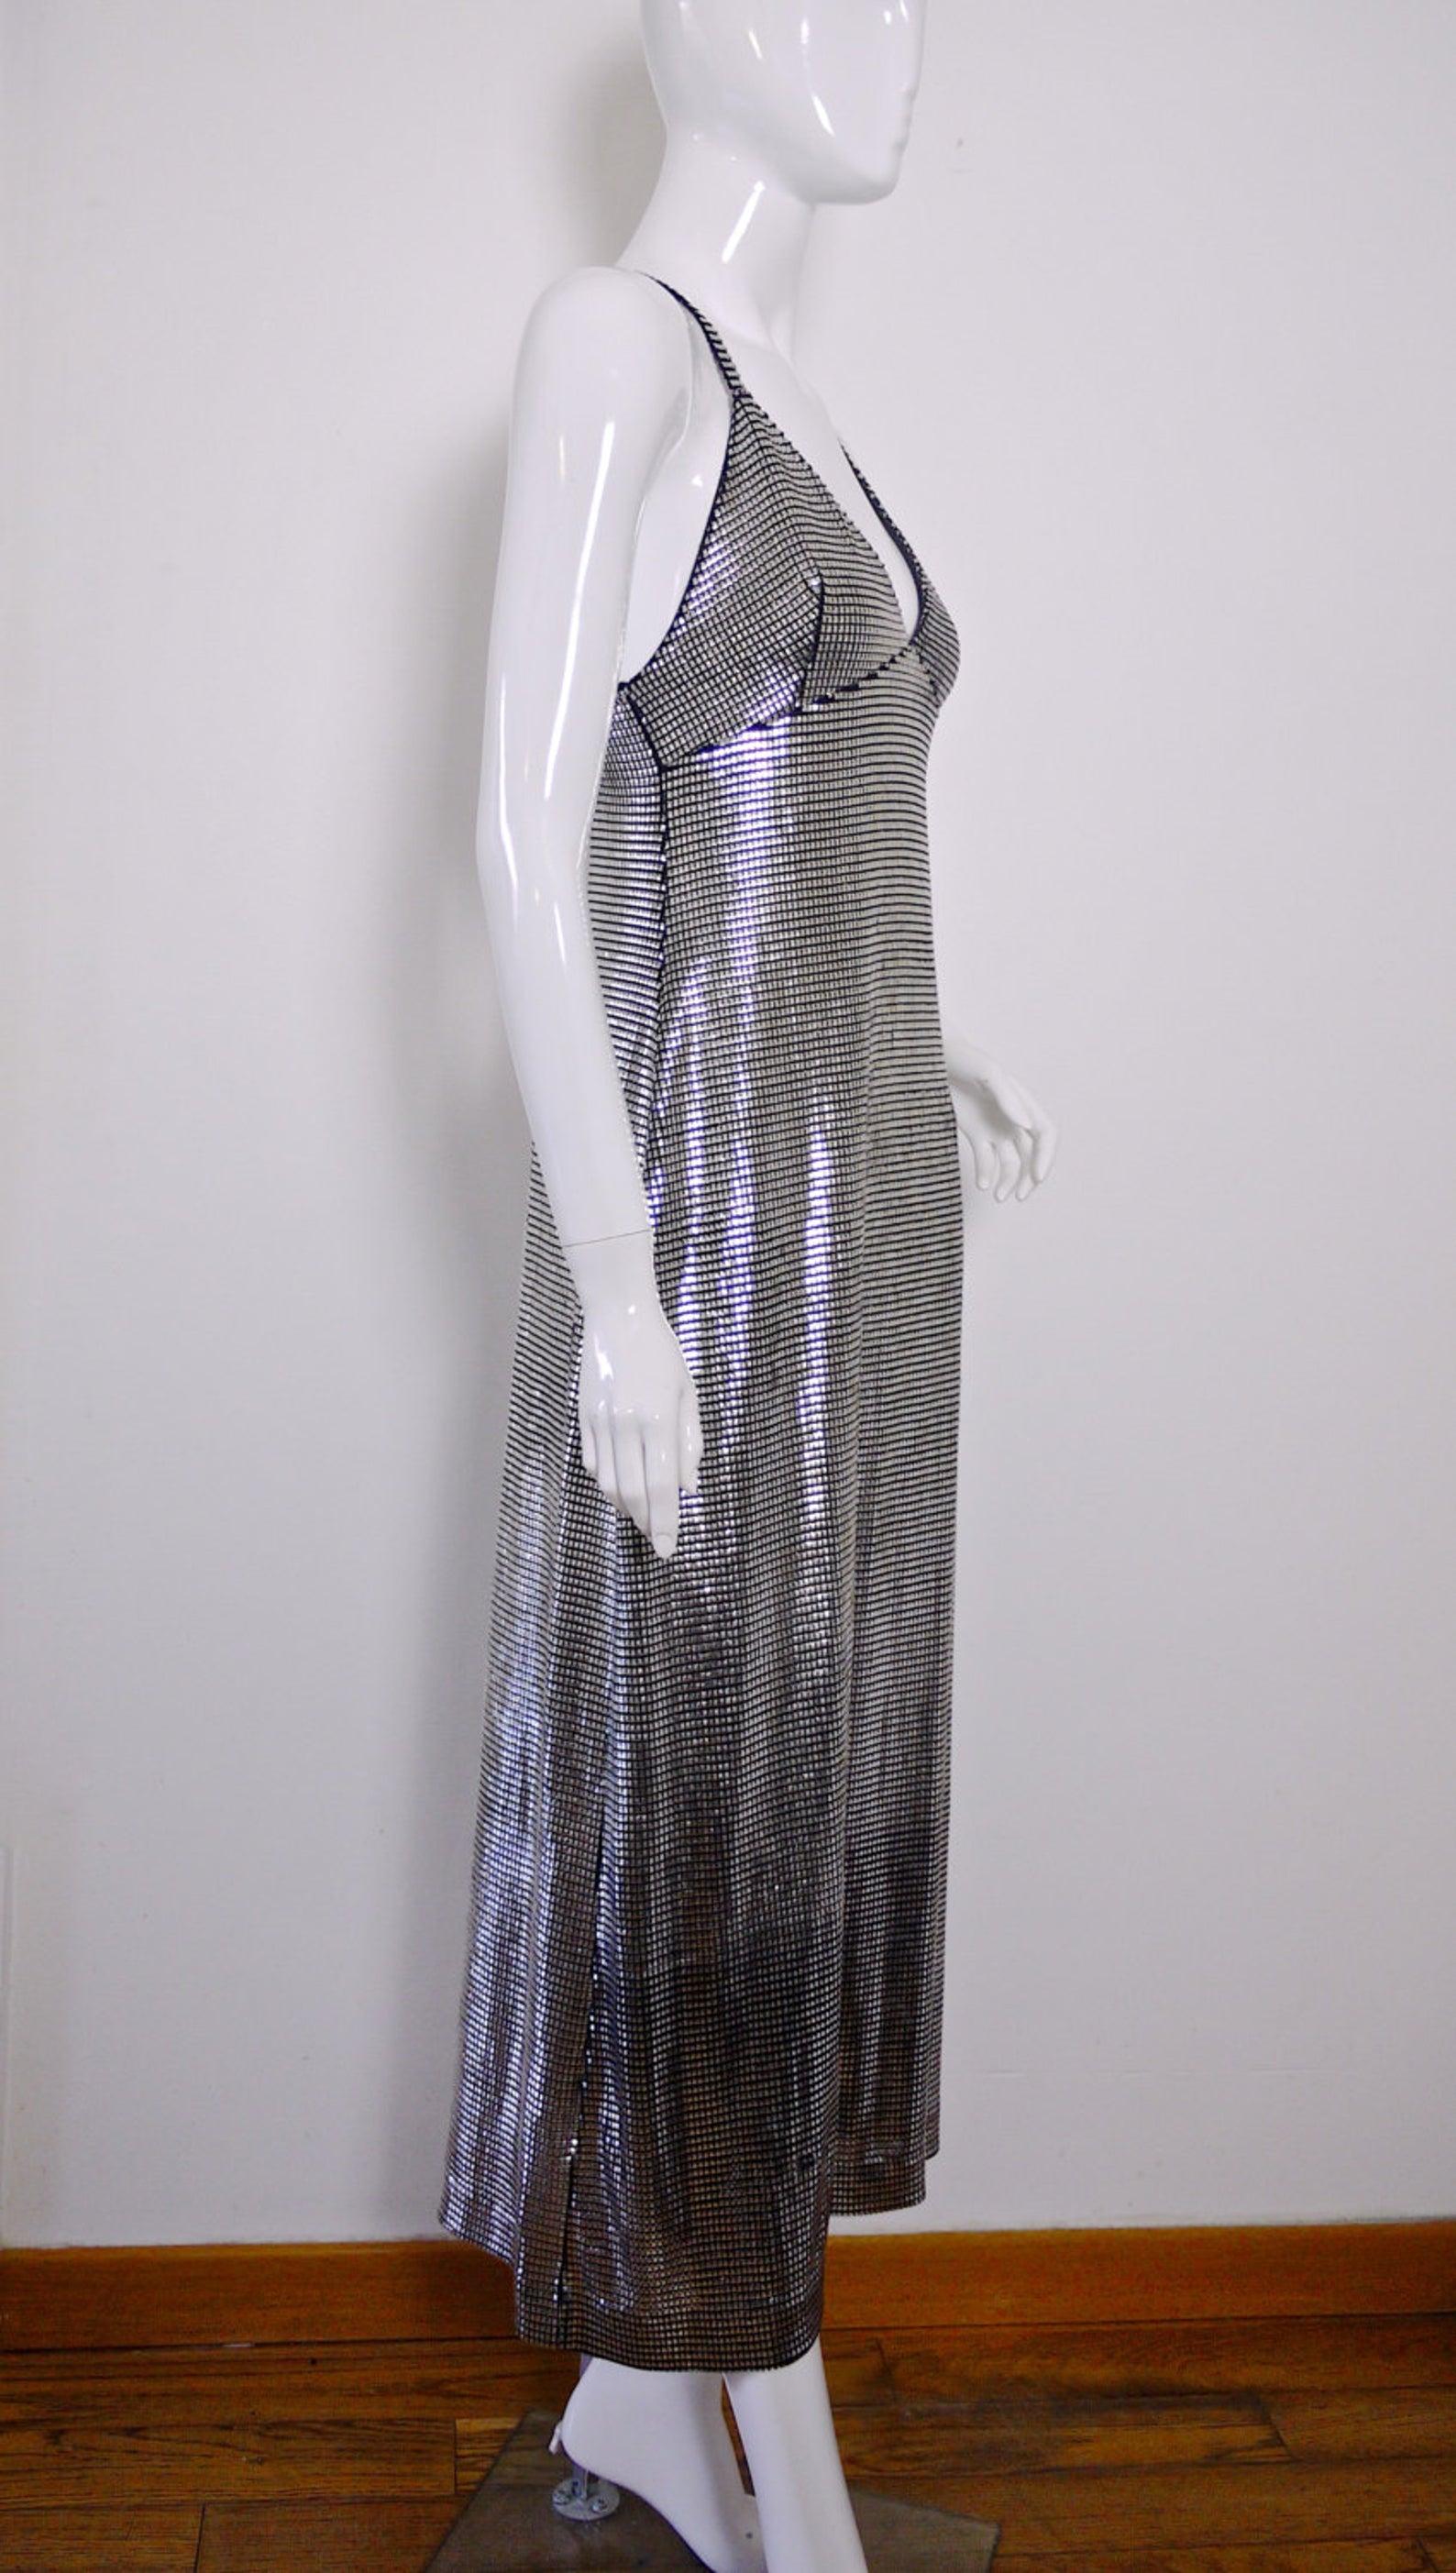 Vintage PACO RABANNE Silver Metallic Mesh Grid Long Dress

Measurements taken laid flat, please double bust and waist:
Bust: 14 inches (35.56 cm) could accommodate bigger size as it is open back dress
Waist: 14 inches (35.56 cm) without